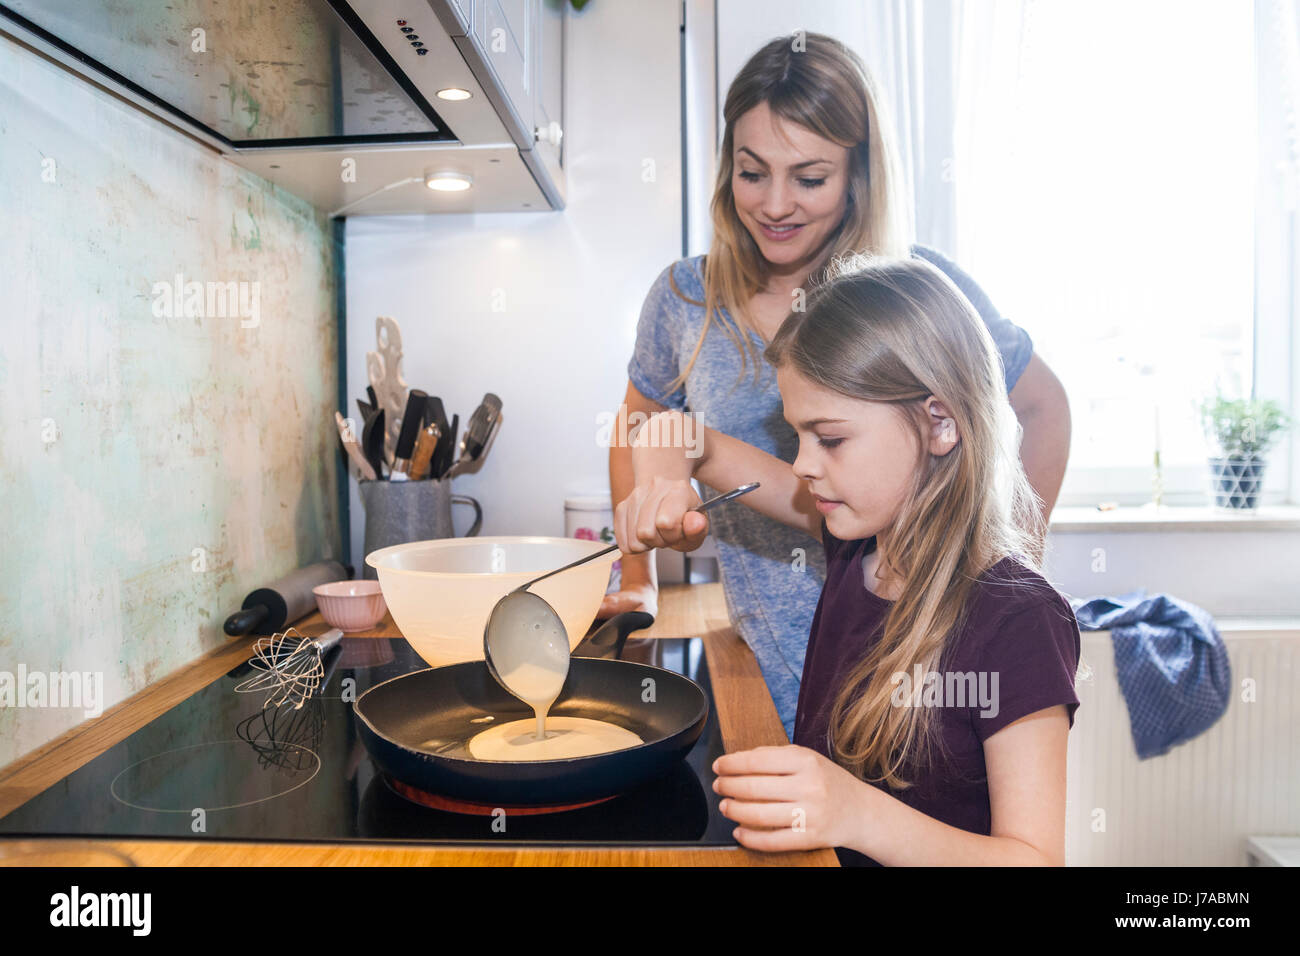 Mother and daughter baking pancakes in kitchen Stock Photo